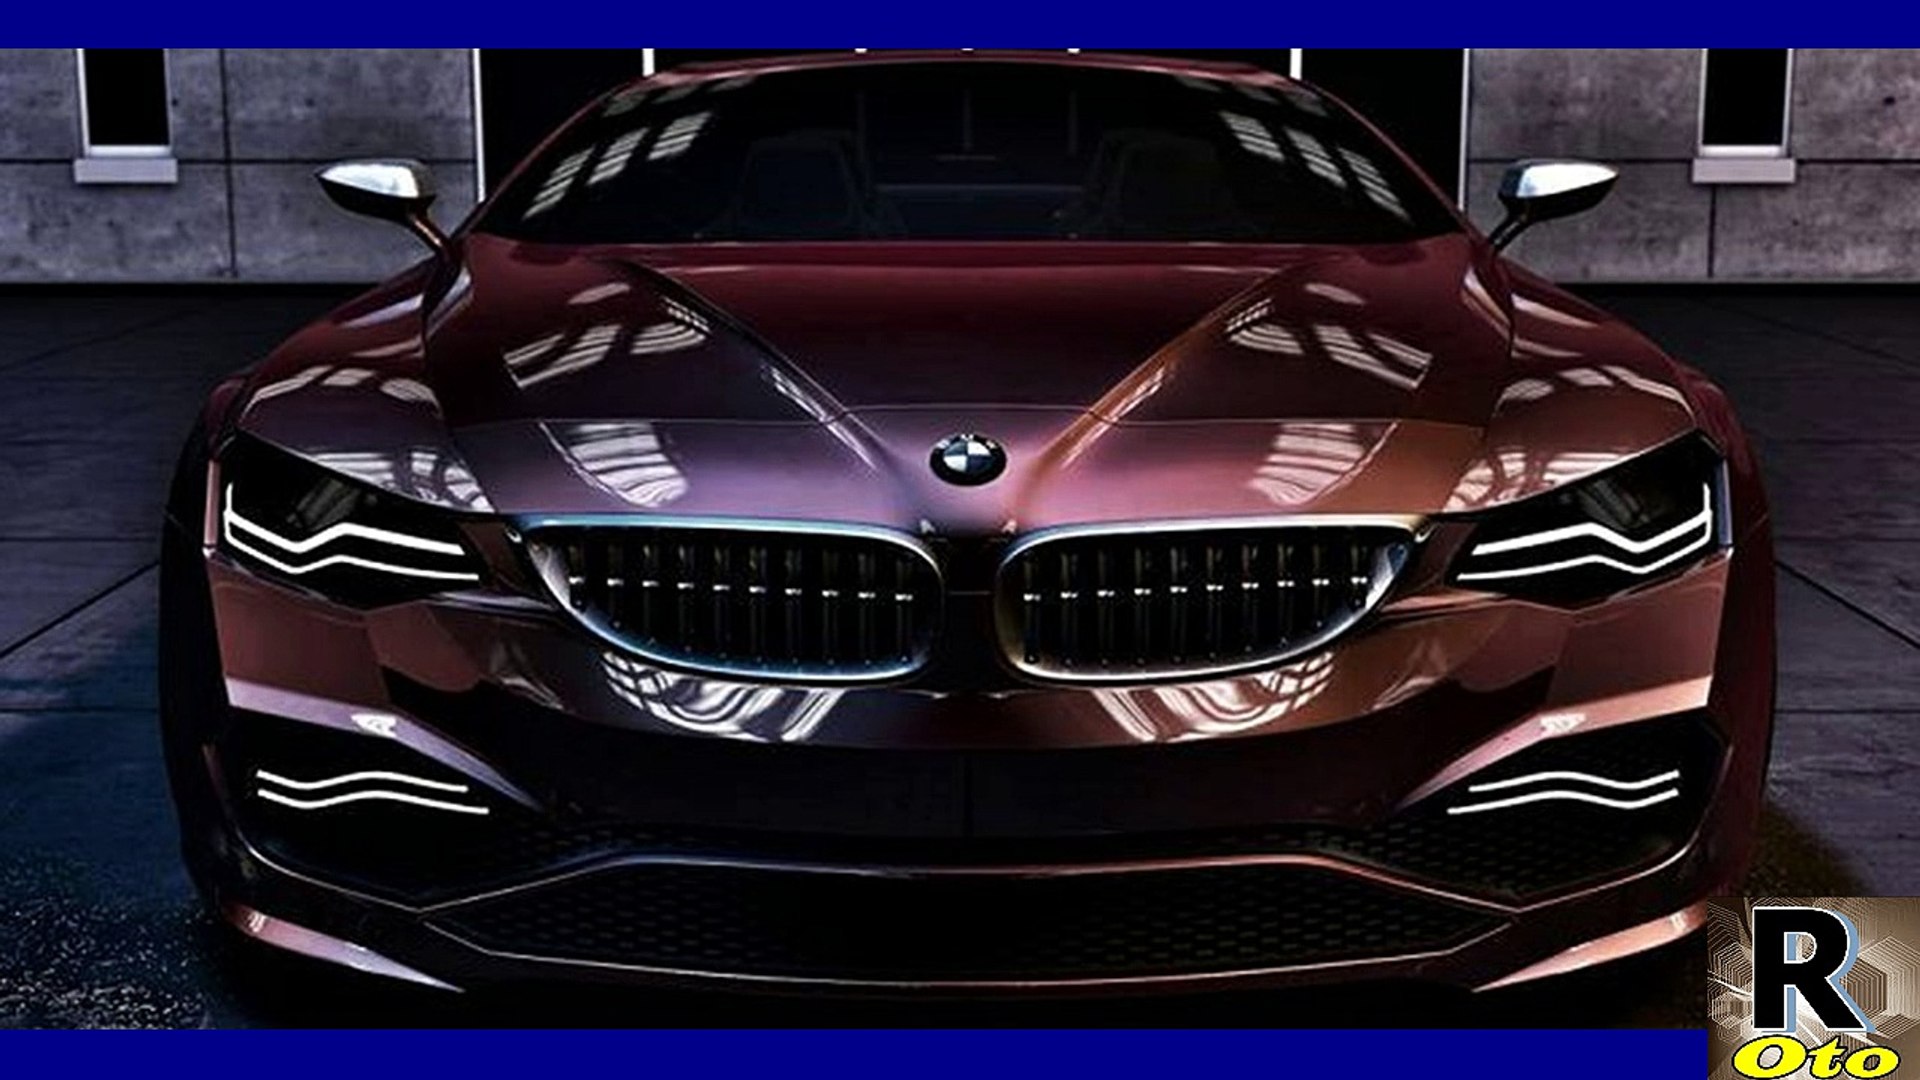 18 Bmw M9 Concept Performance And Design Video Dailymotion